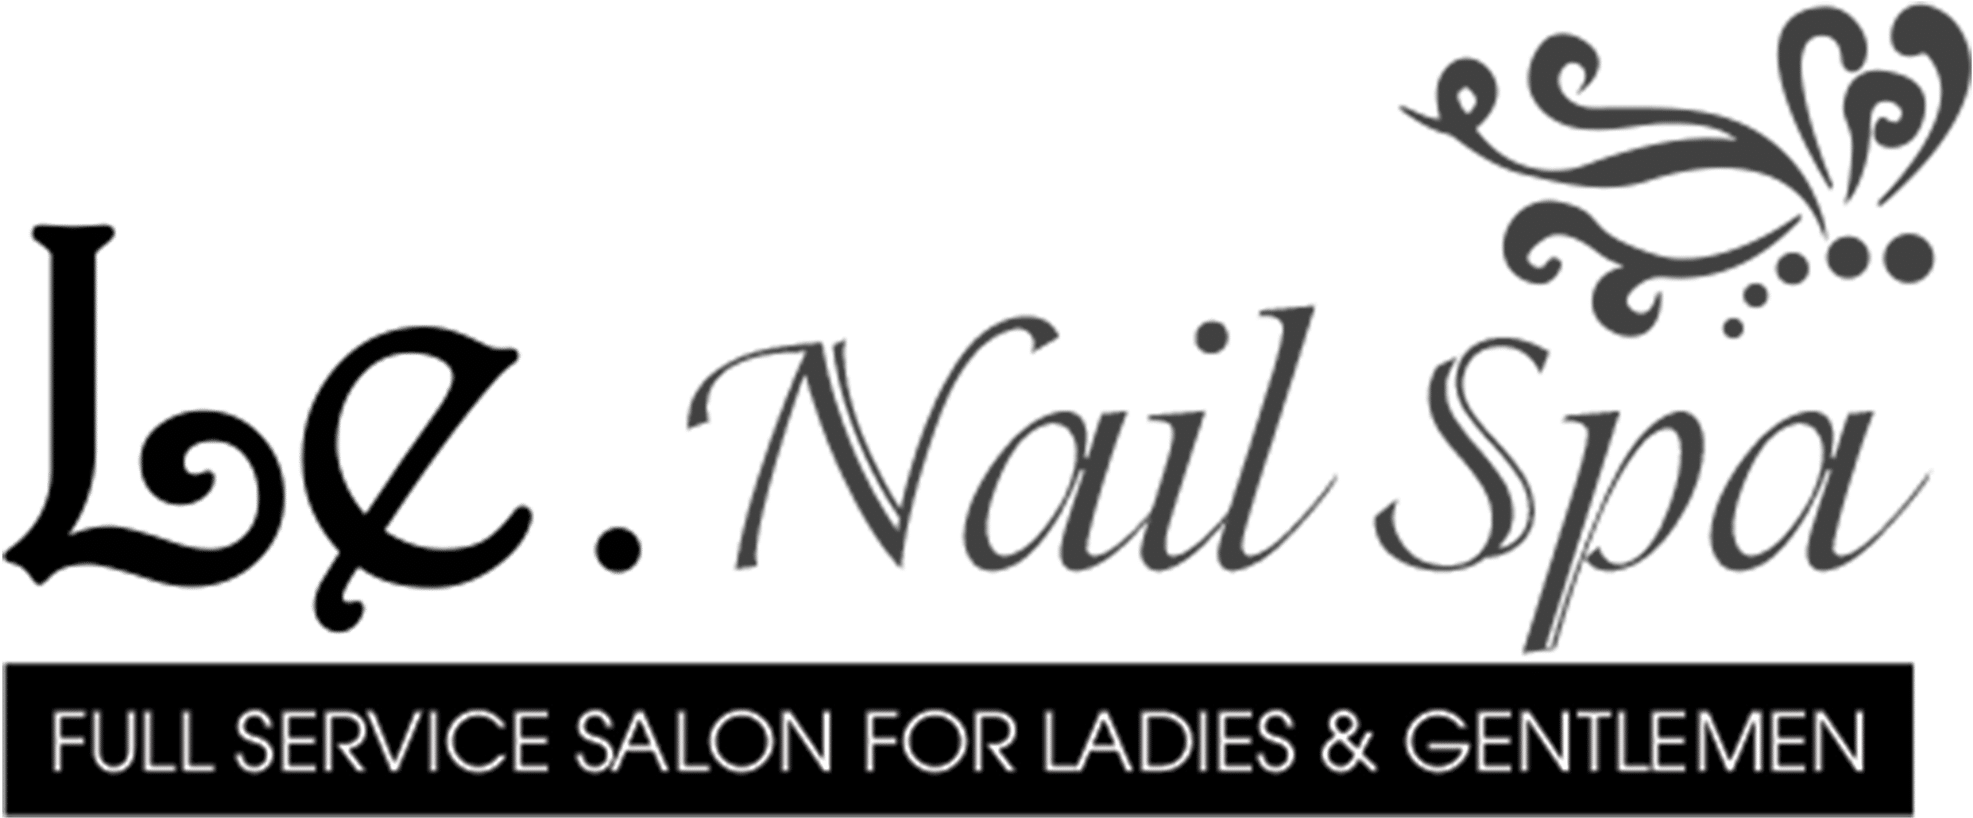 Le Nail Spa Slidell - Calligraphy Clipart - Large Size Png Image - PikPng